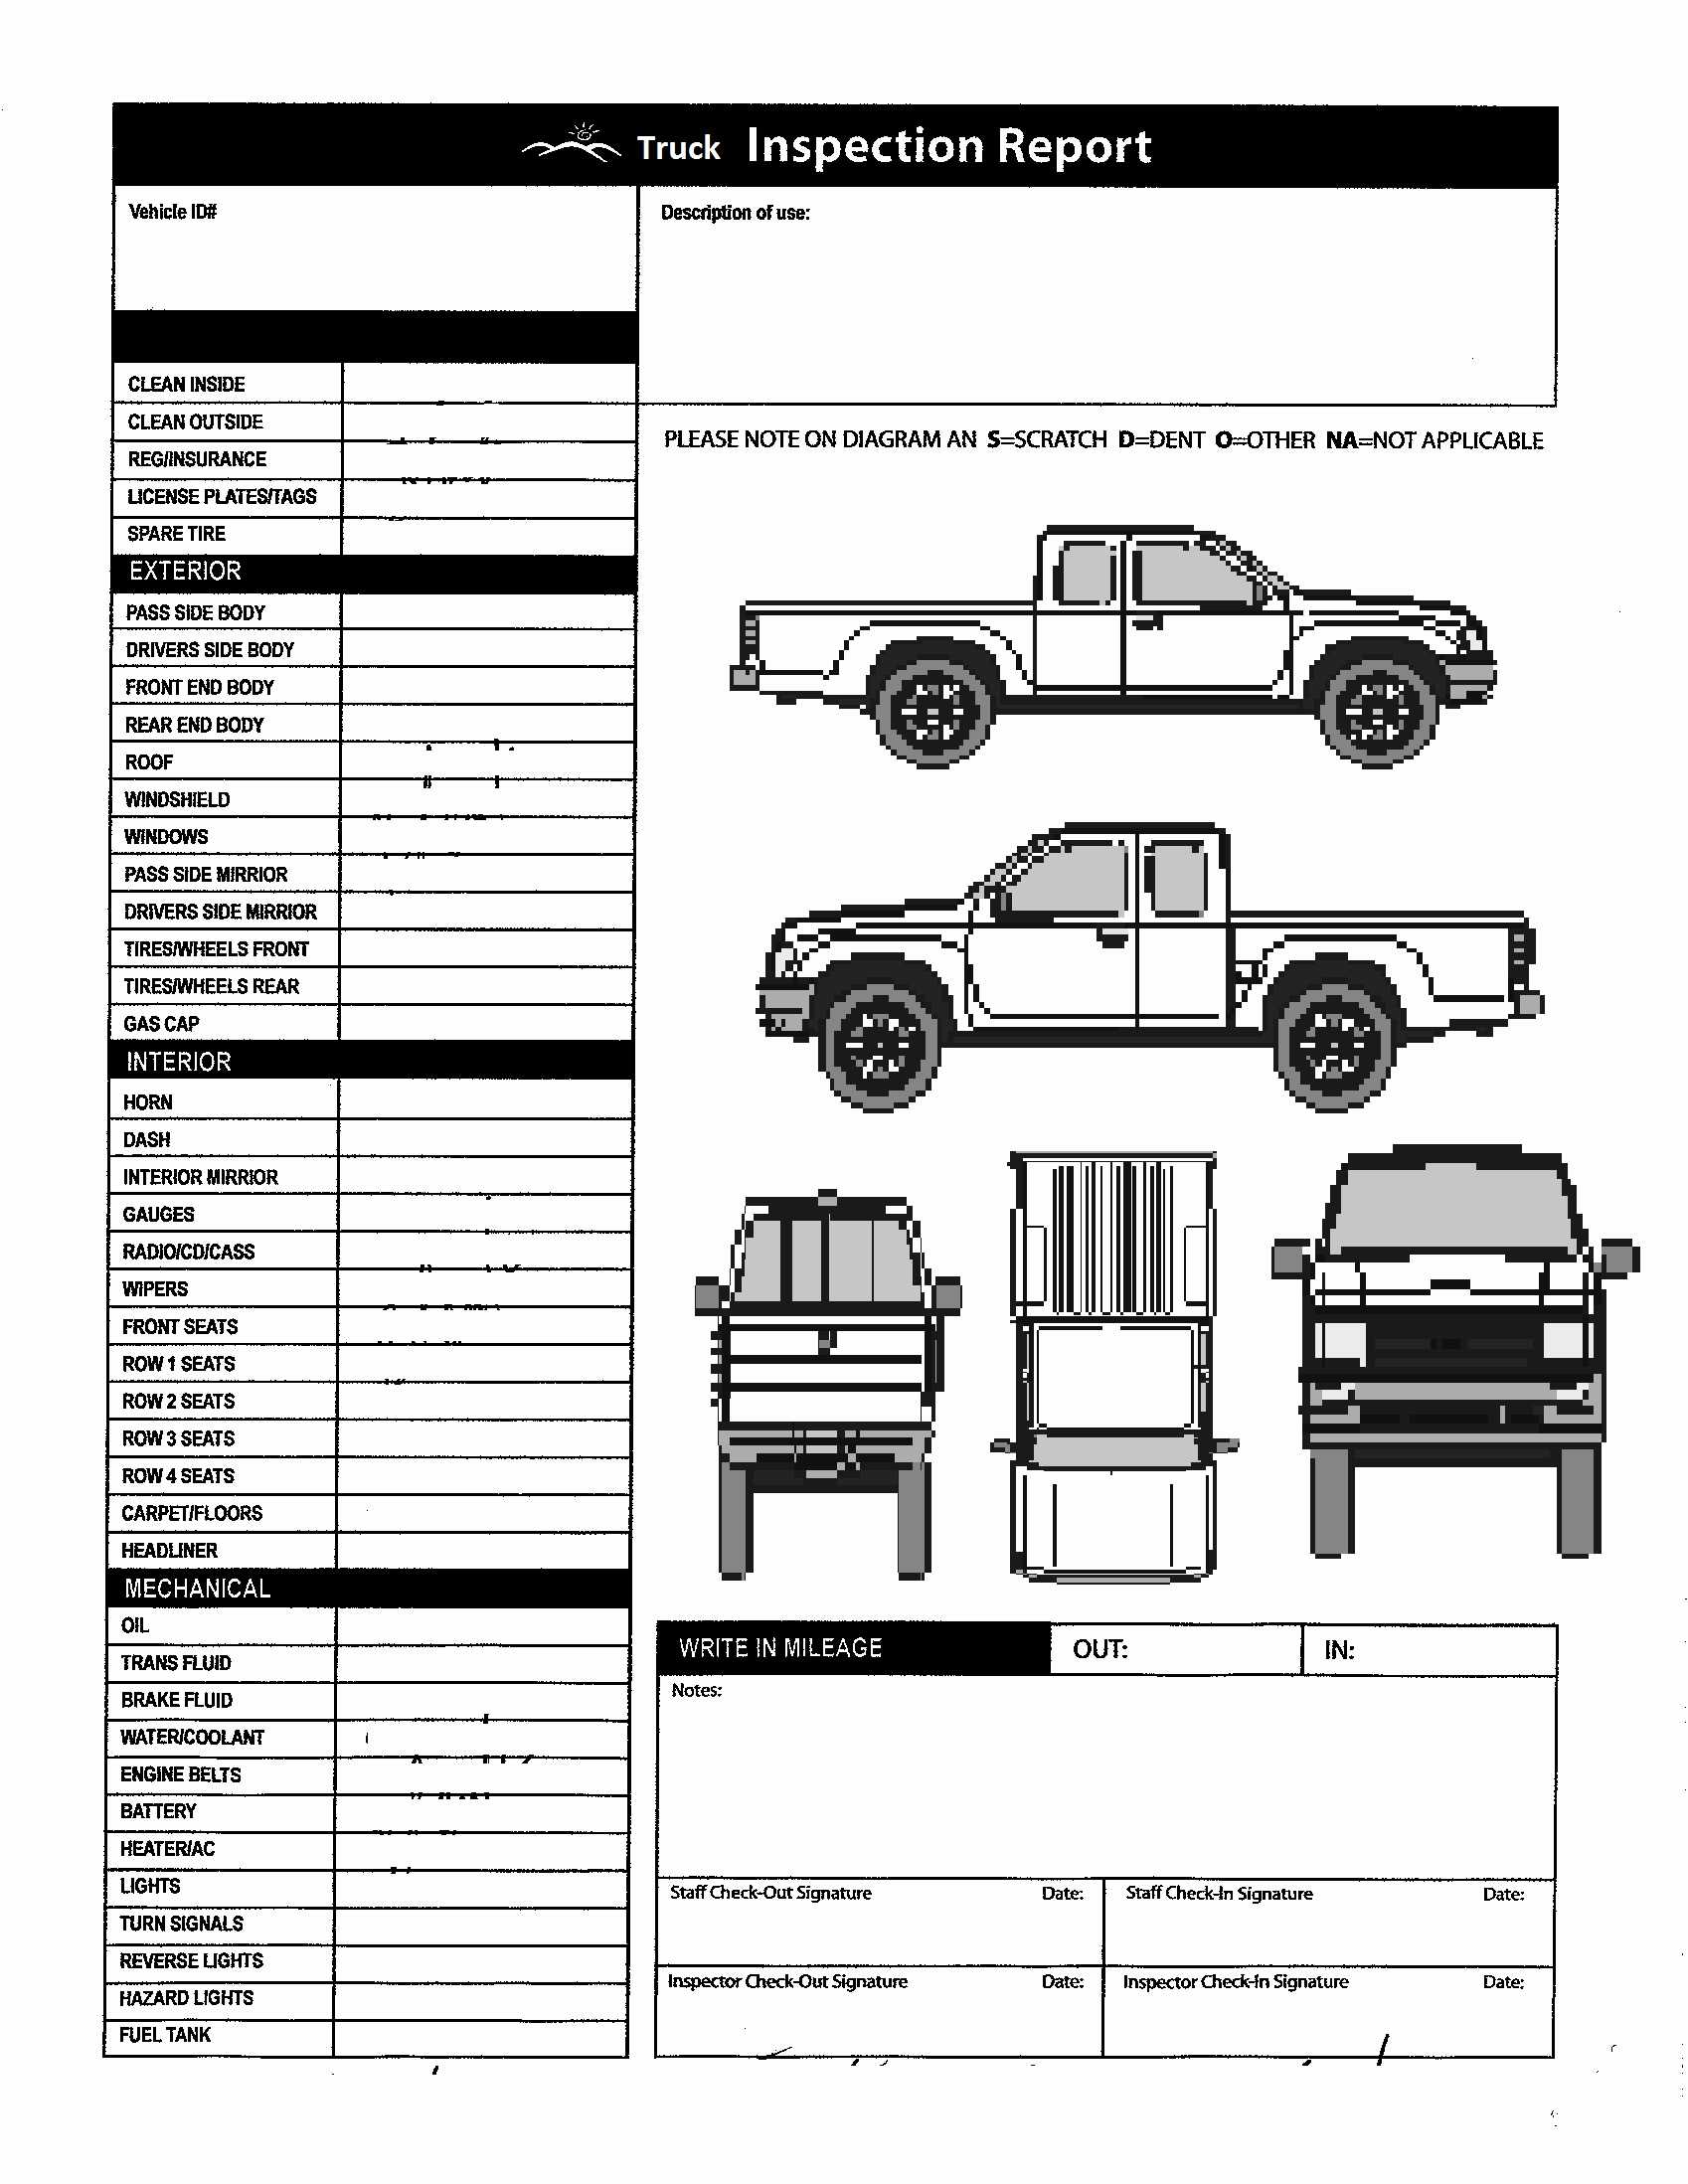 Inspection Spreadsheet Template Vehicle Checklist Excel Pertaining To Vehicle Inspection Report Template